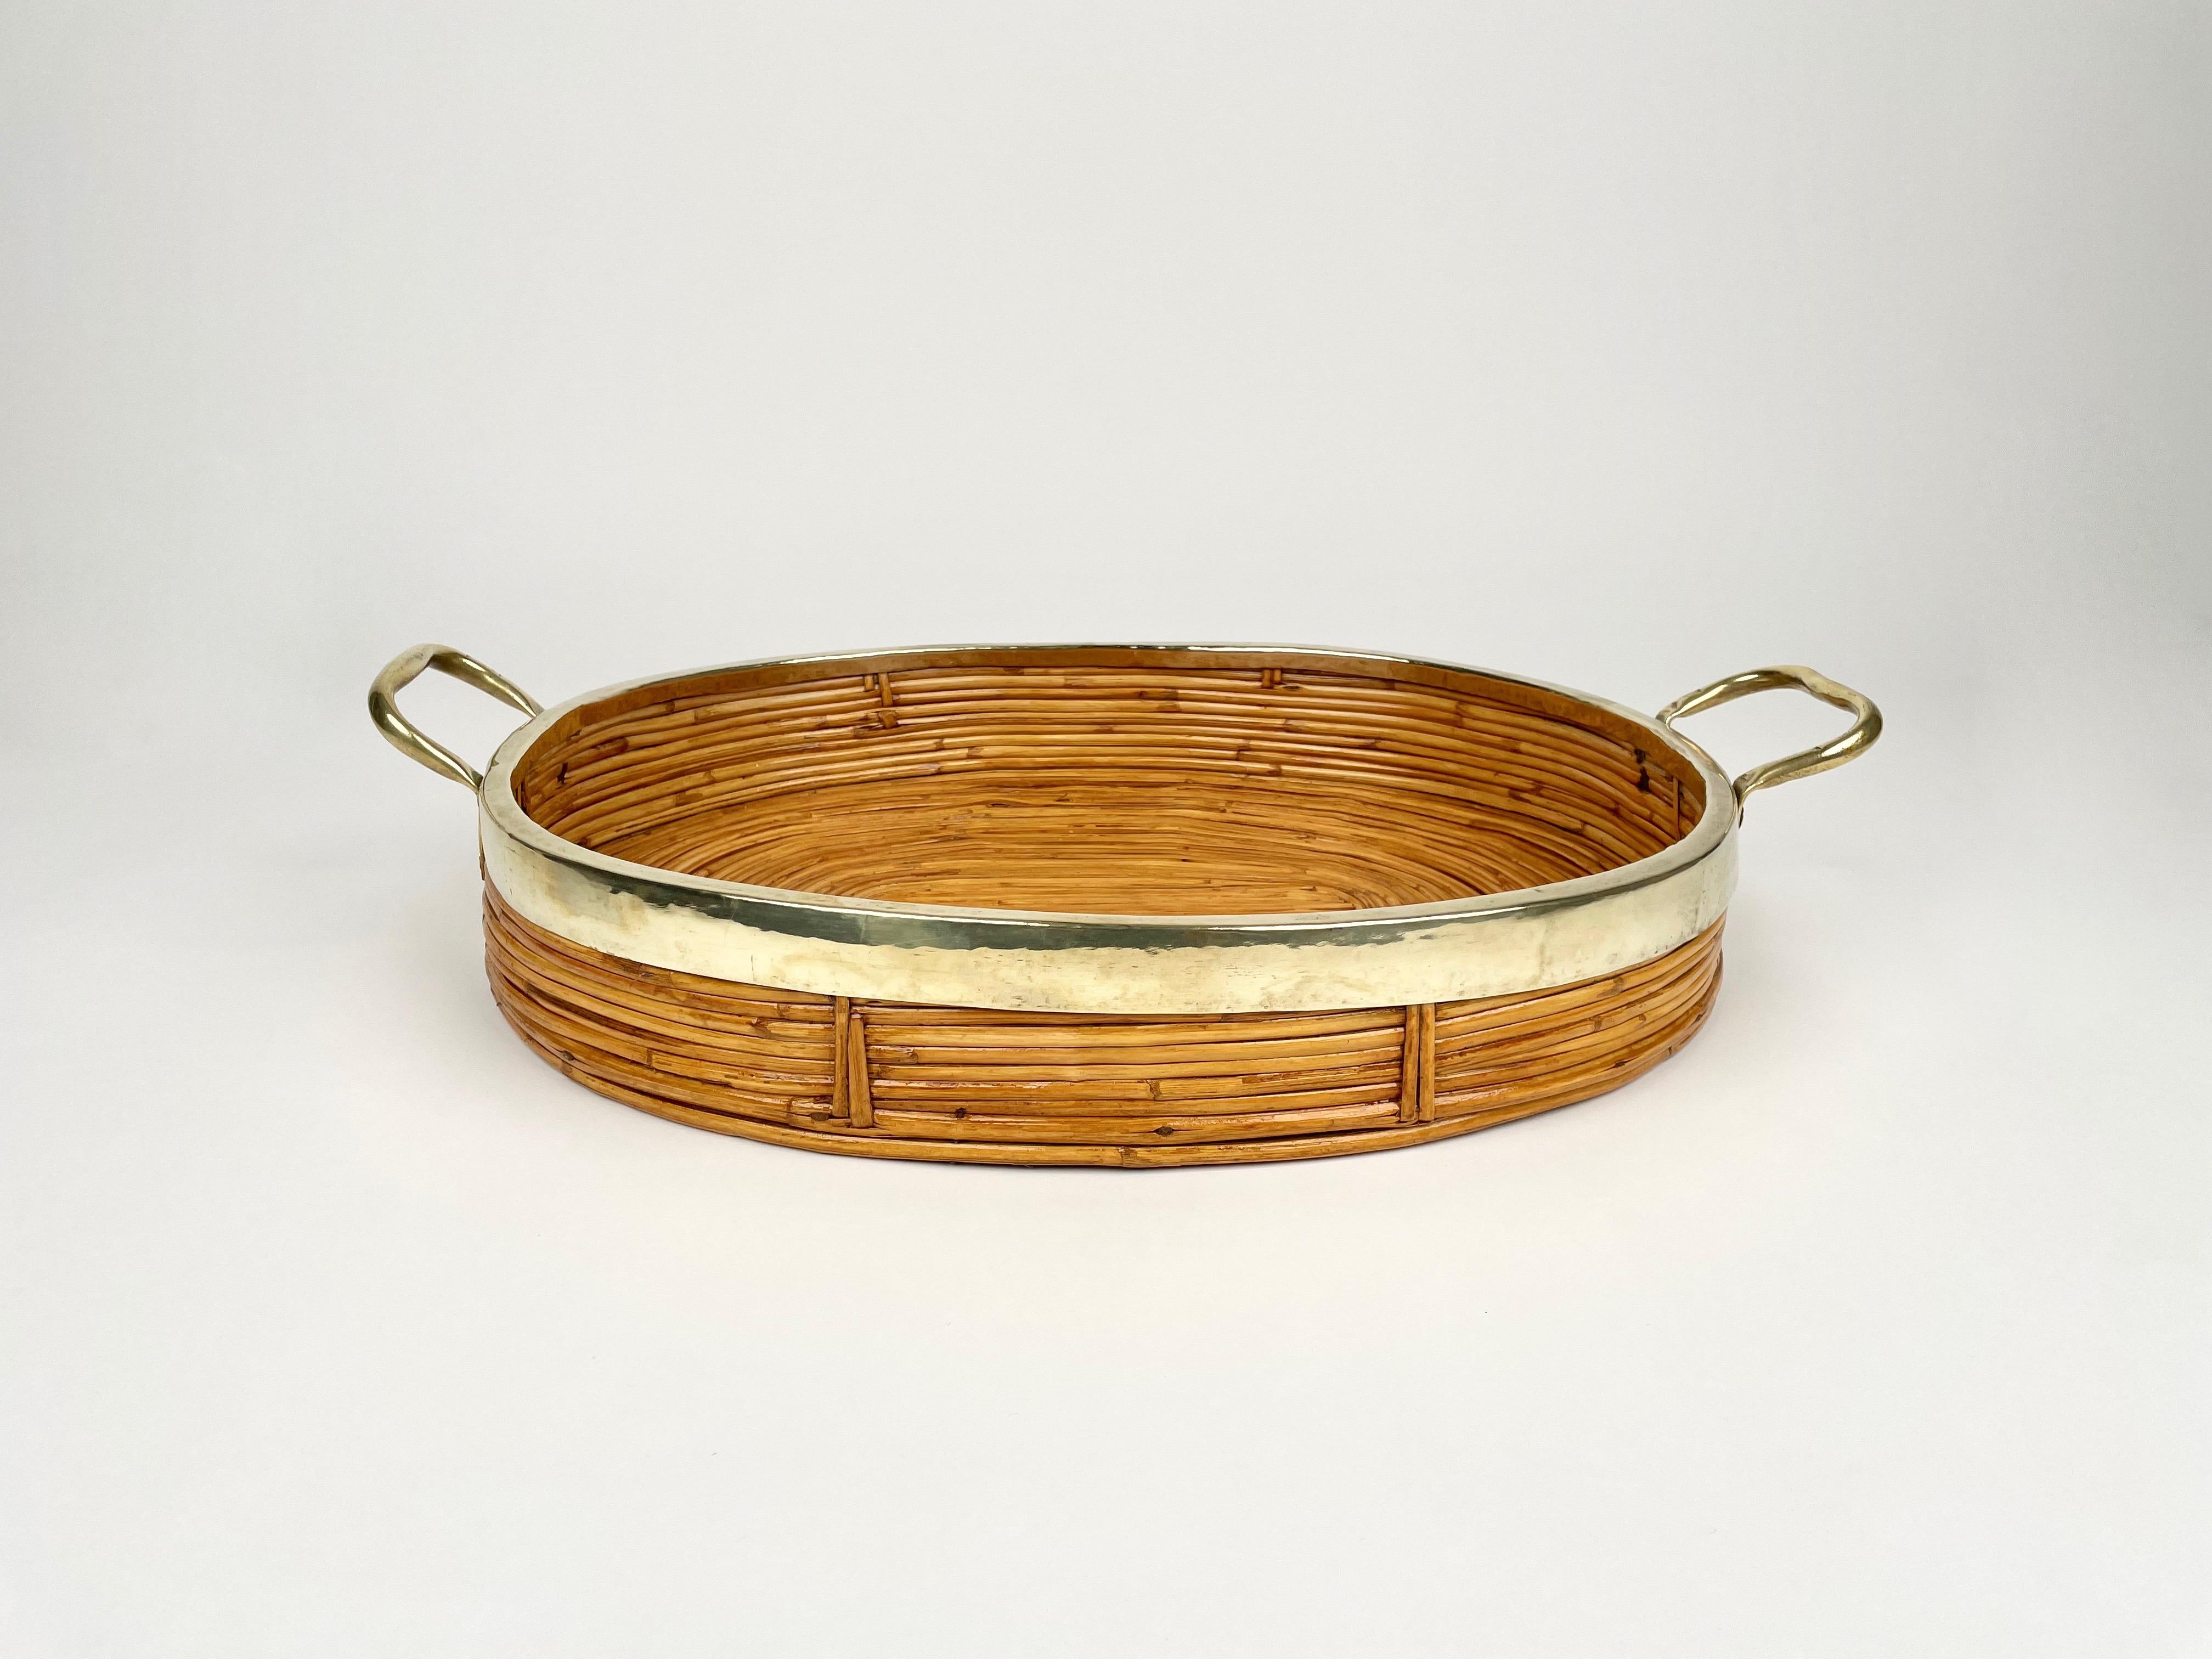 Italian Oval Serving Tray Bamboo, Rattan & Brass, Italy 1970s For Sale